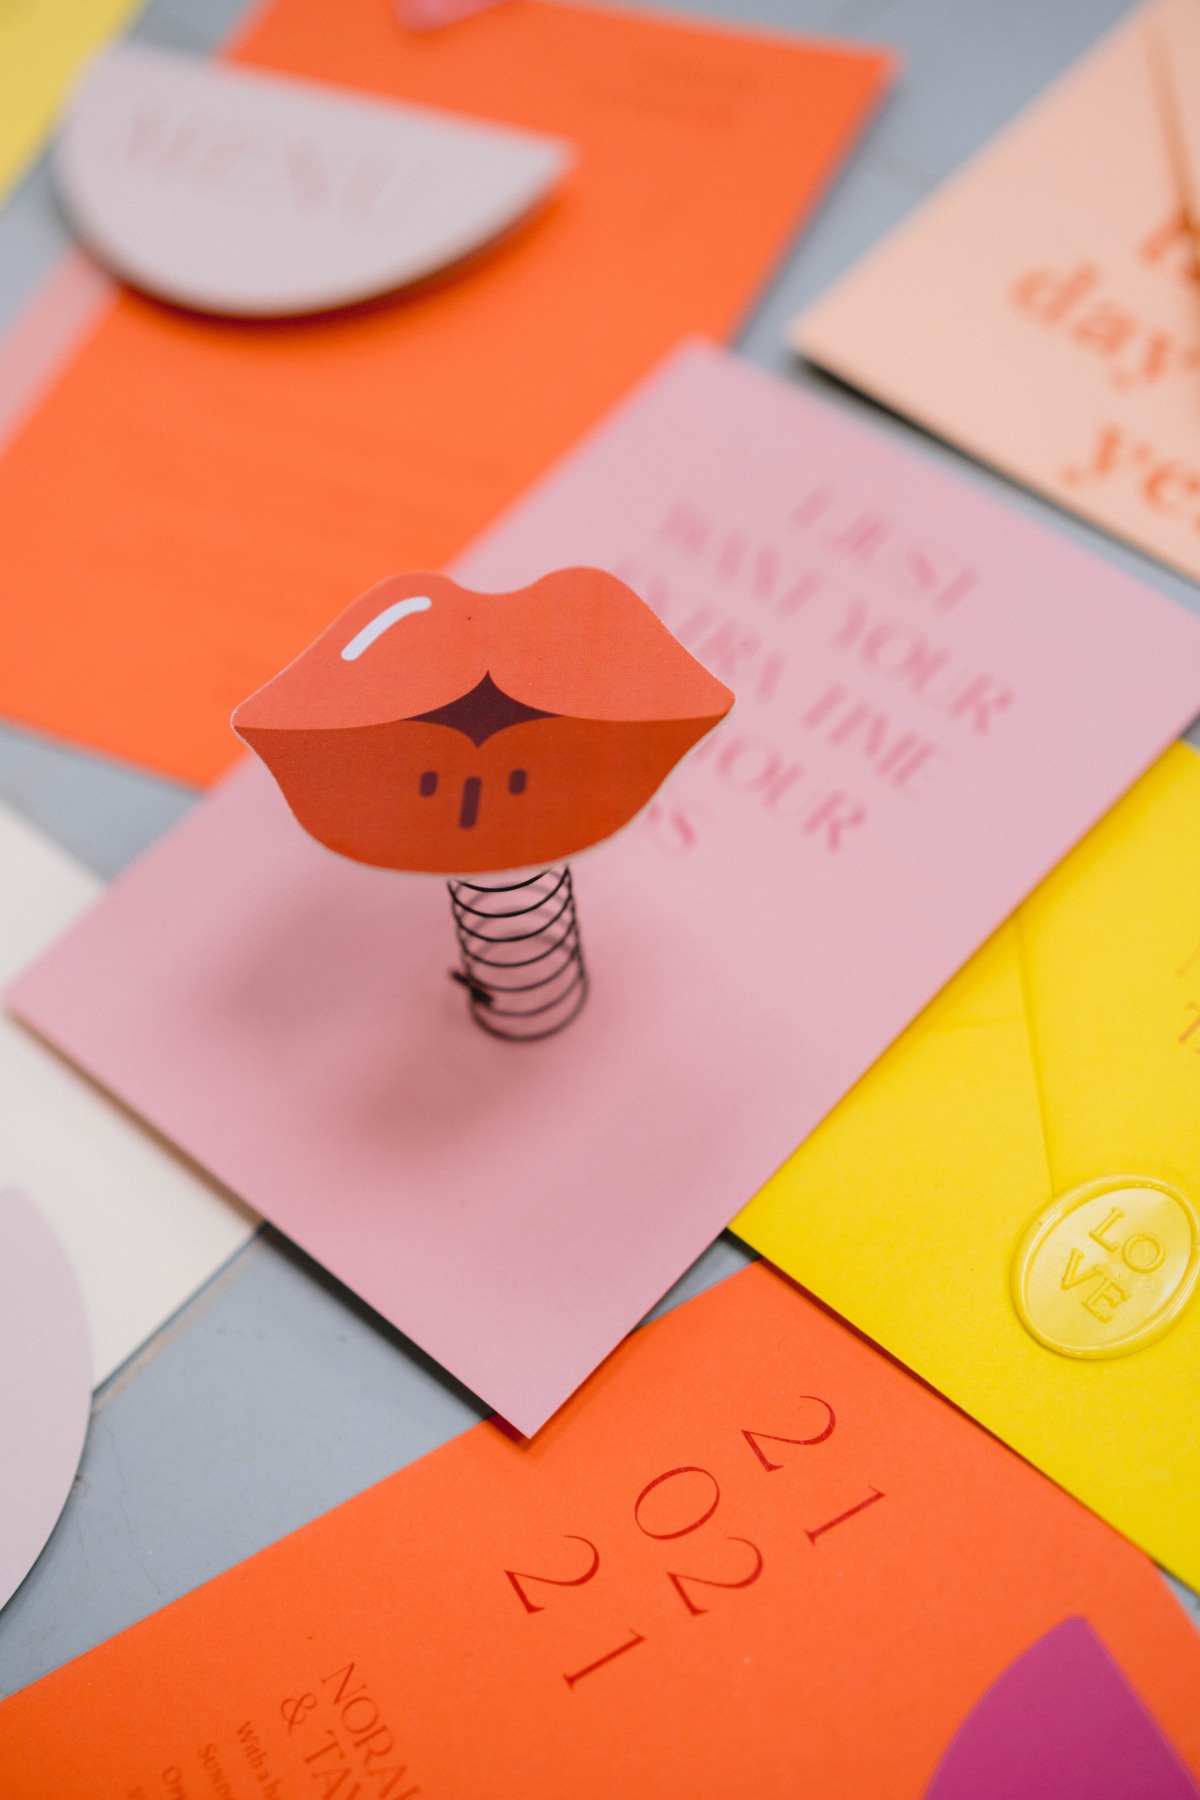 Street Art Inspired Wedding That Dares To Go Bold